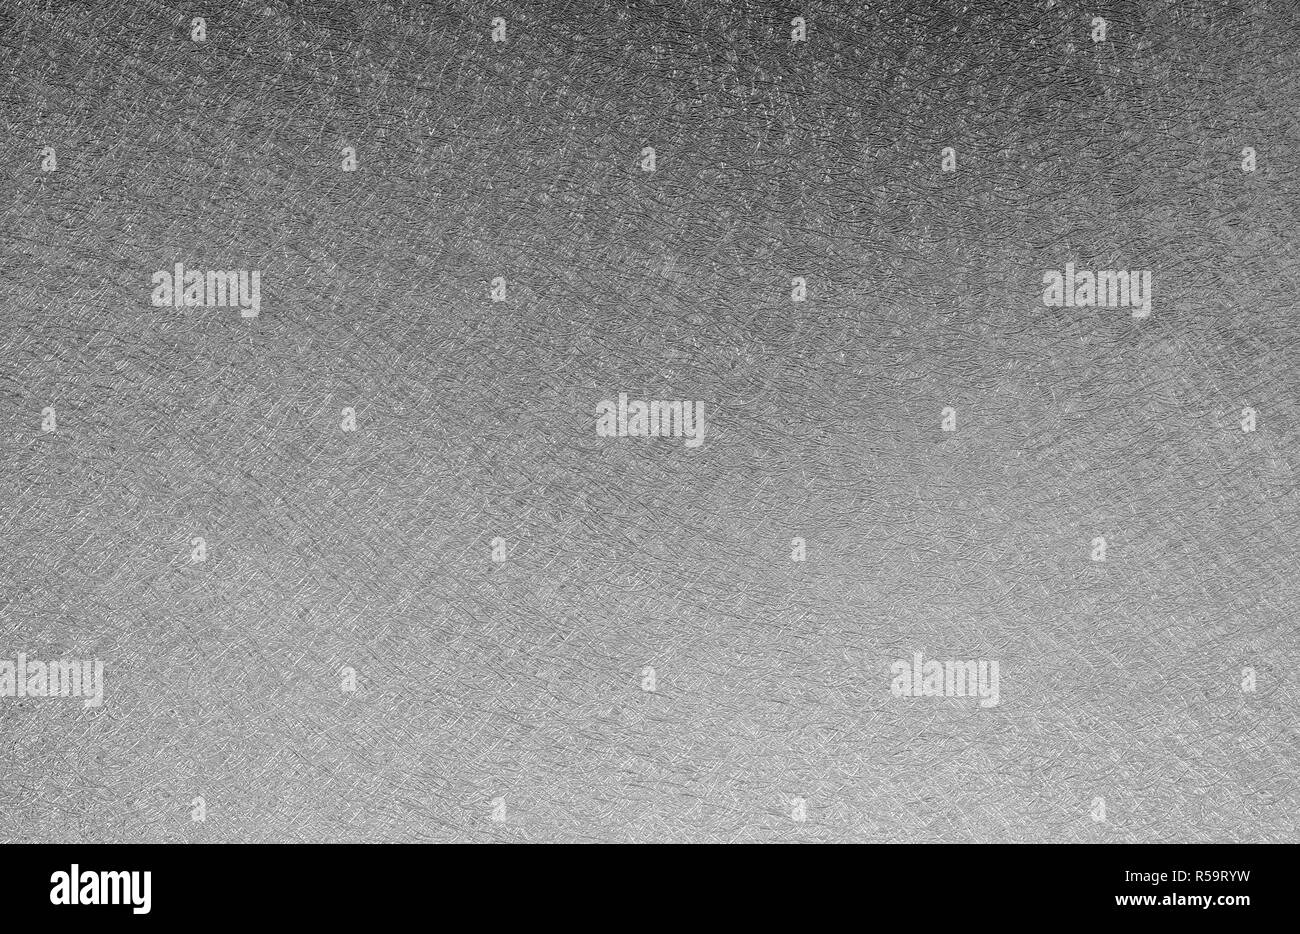 Fine threads Black and White Stock Photos & Images - Alamy